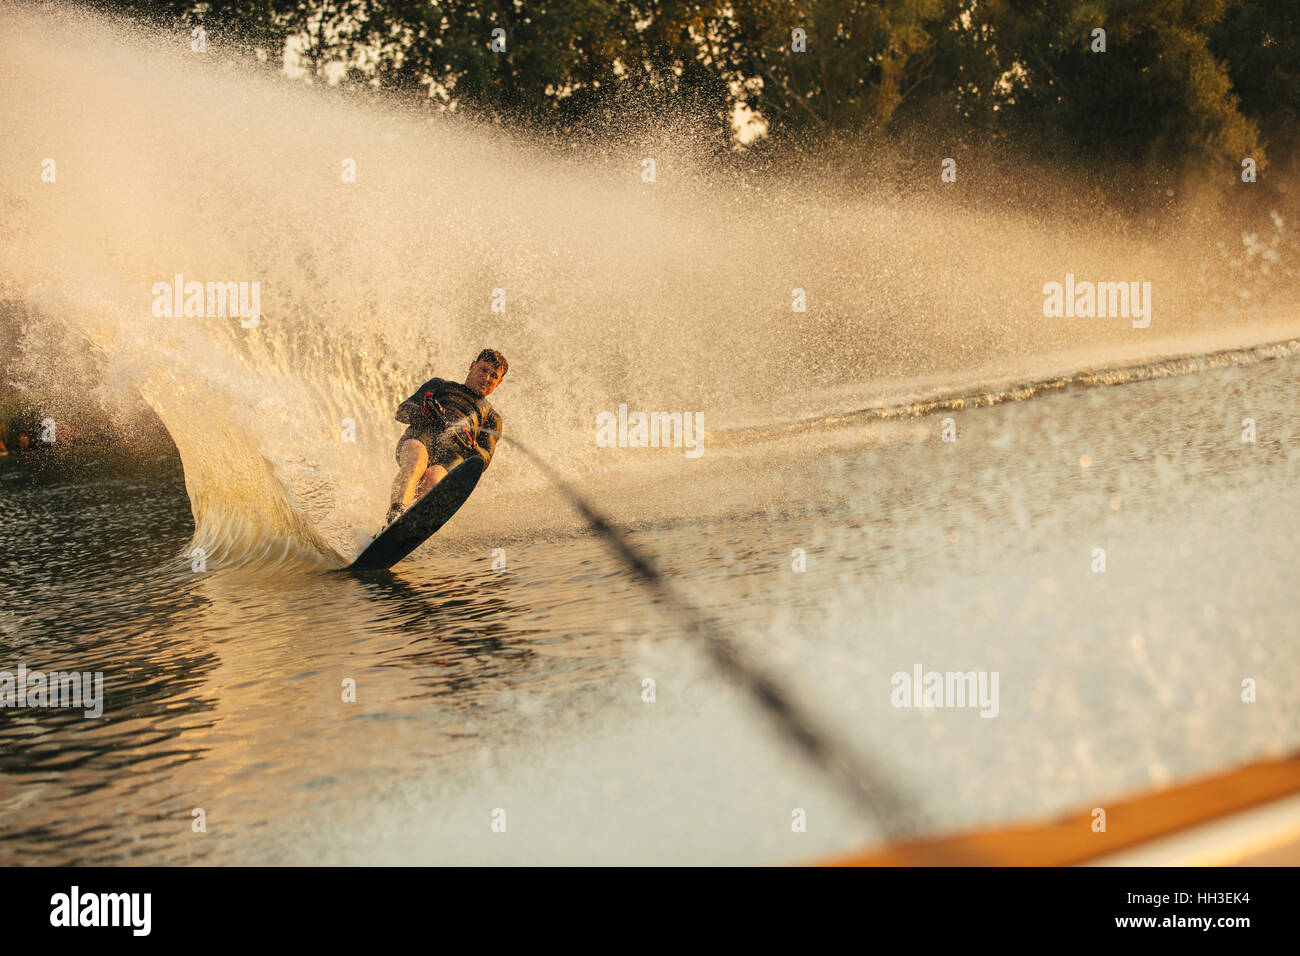 Man wakeboarding on a lake. Wakeboarder surfing across the lake. Stock Photo